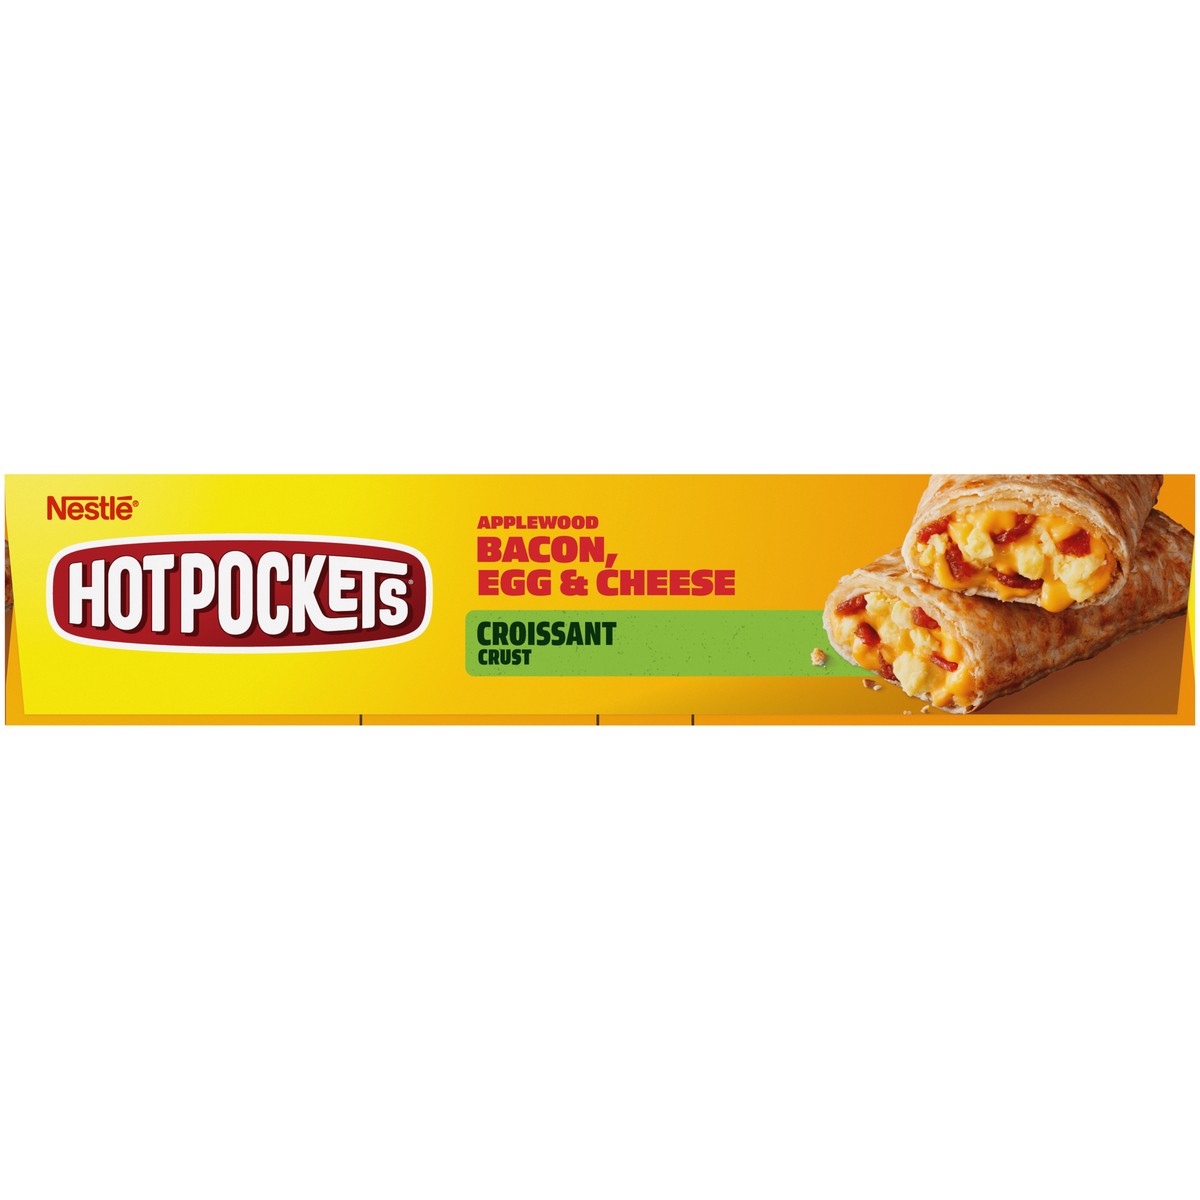 slide 7 of 9, Hot Pockets Applewood Bacon, Egg & Cheese Croissant Crust Frozen Breakfast Sandwiches, Breakfast Hot Pockets Made with Cheddar Cheese, 2 Count, 8.5 oz